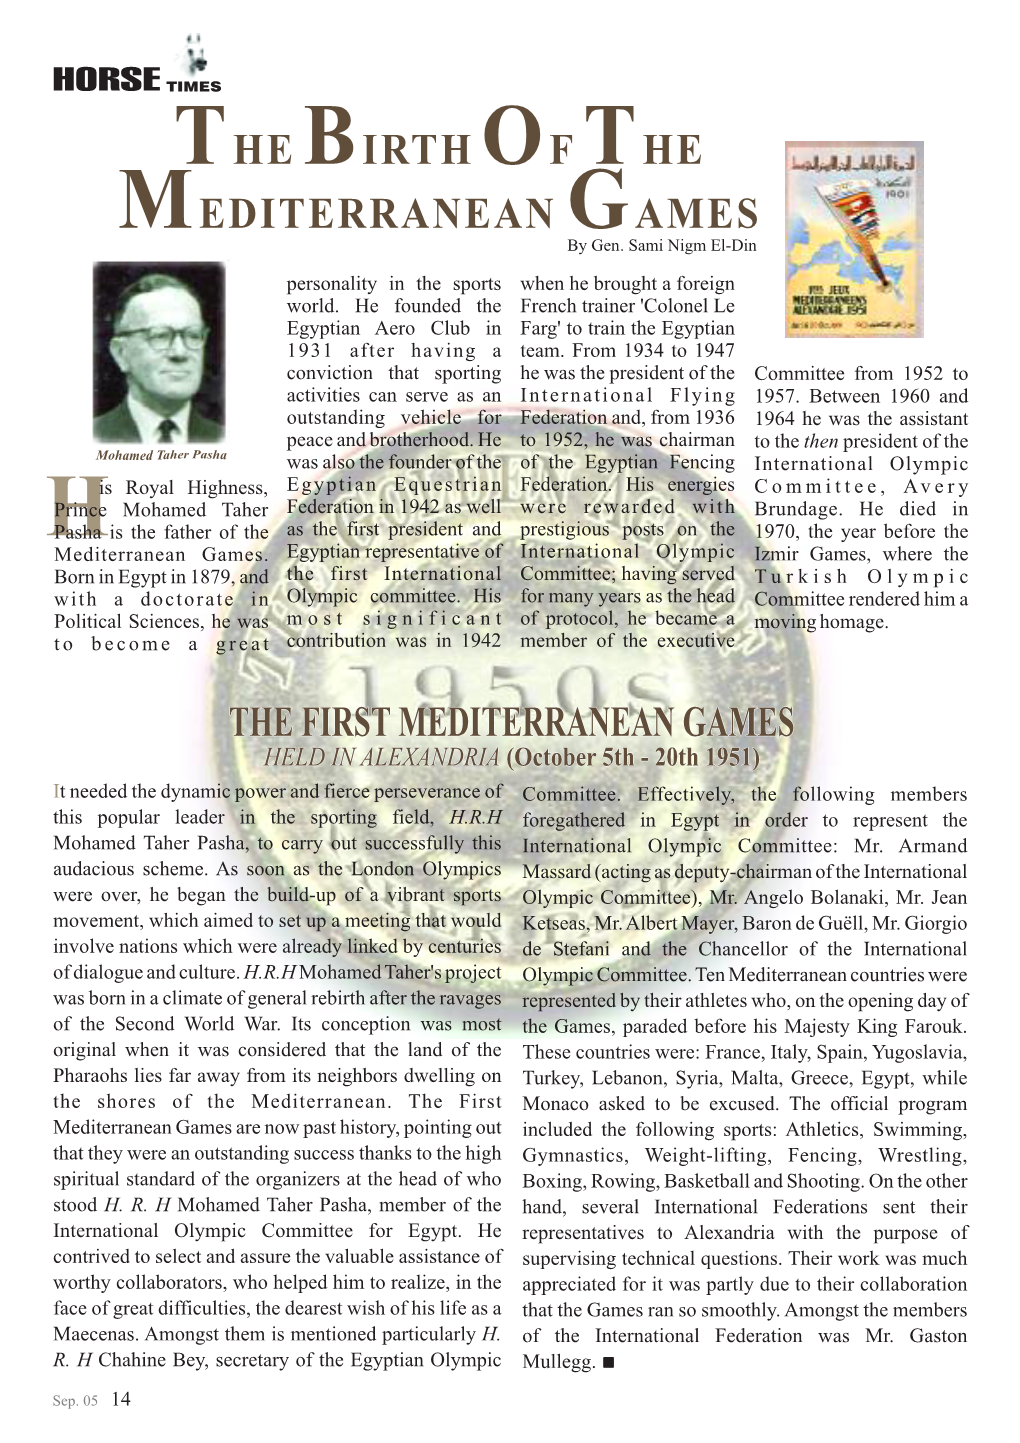 The Birth of the Mediterranean Games